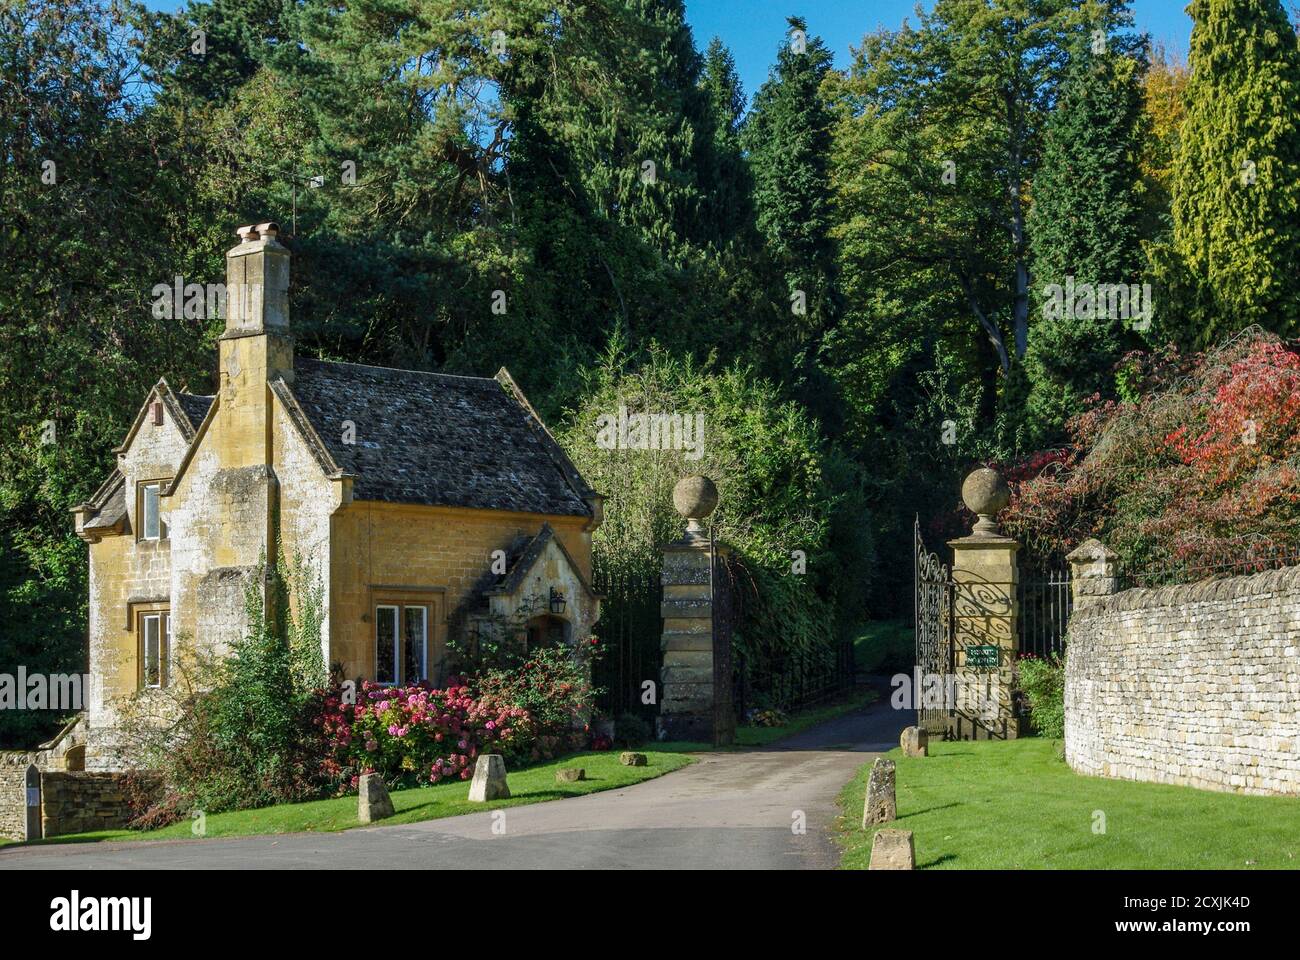 Lodge and gates at the entrance to Batsford House, Batsford village, Gloucestershire, UK Stock Photo